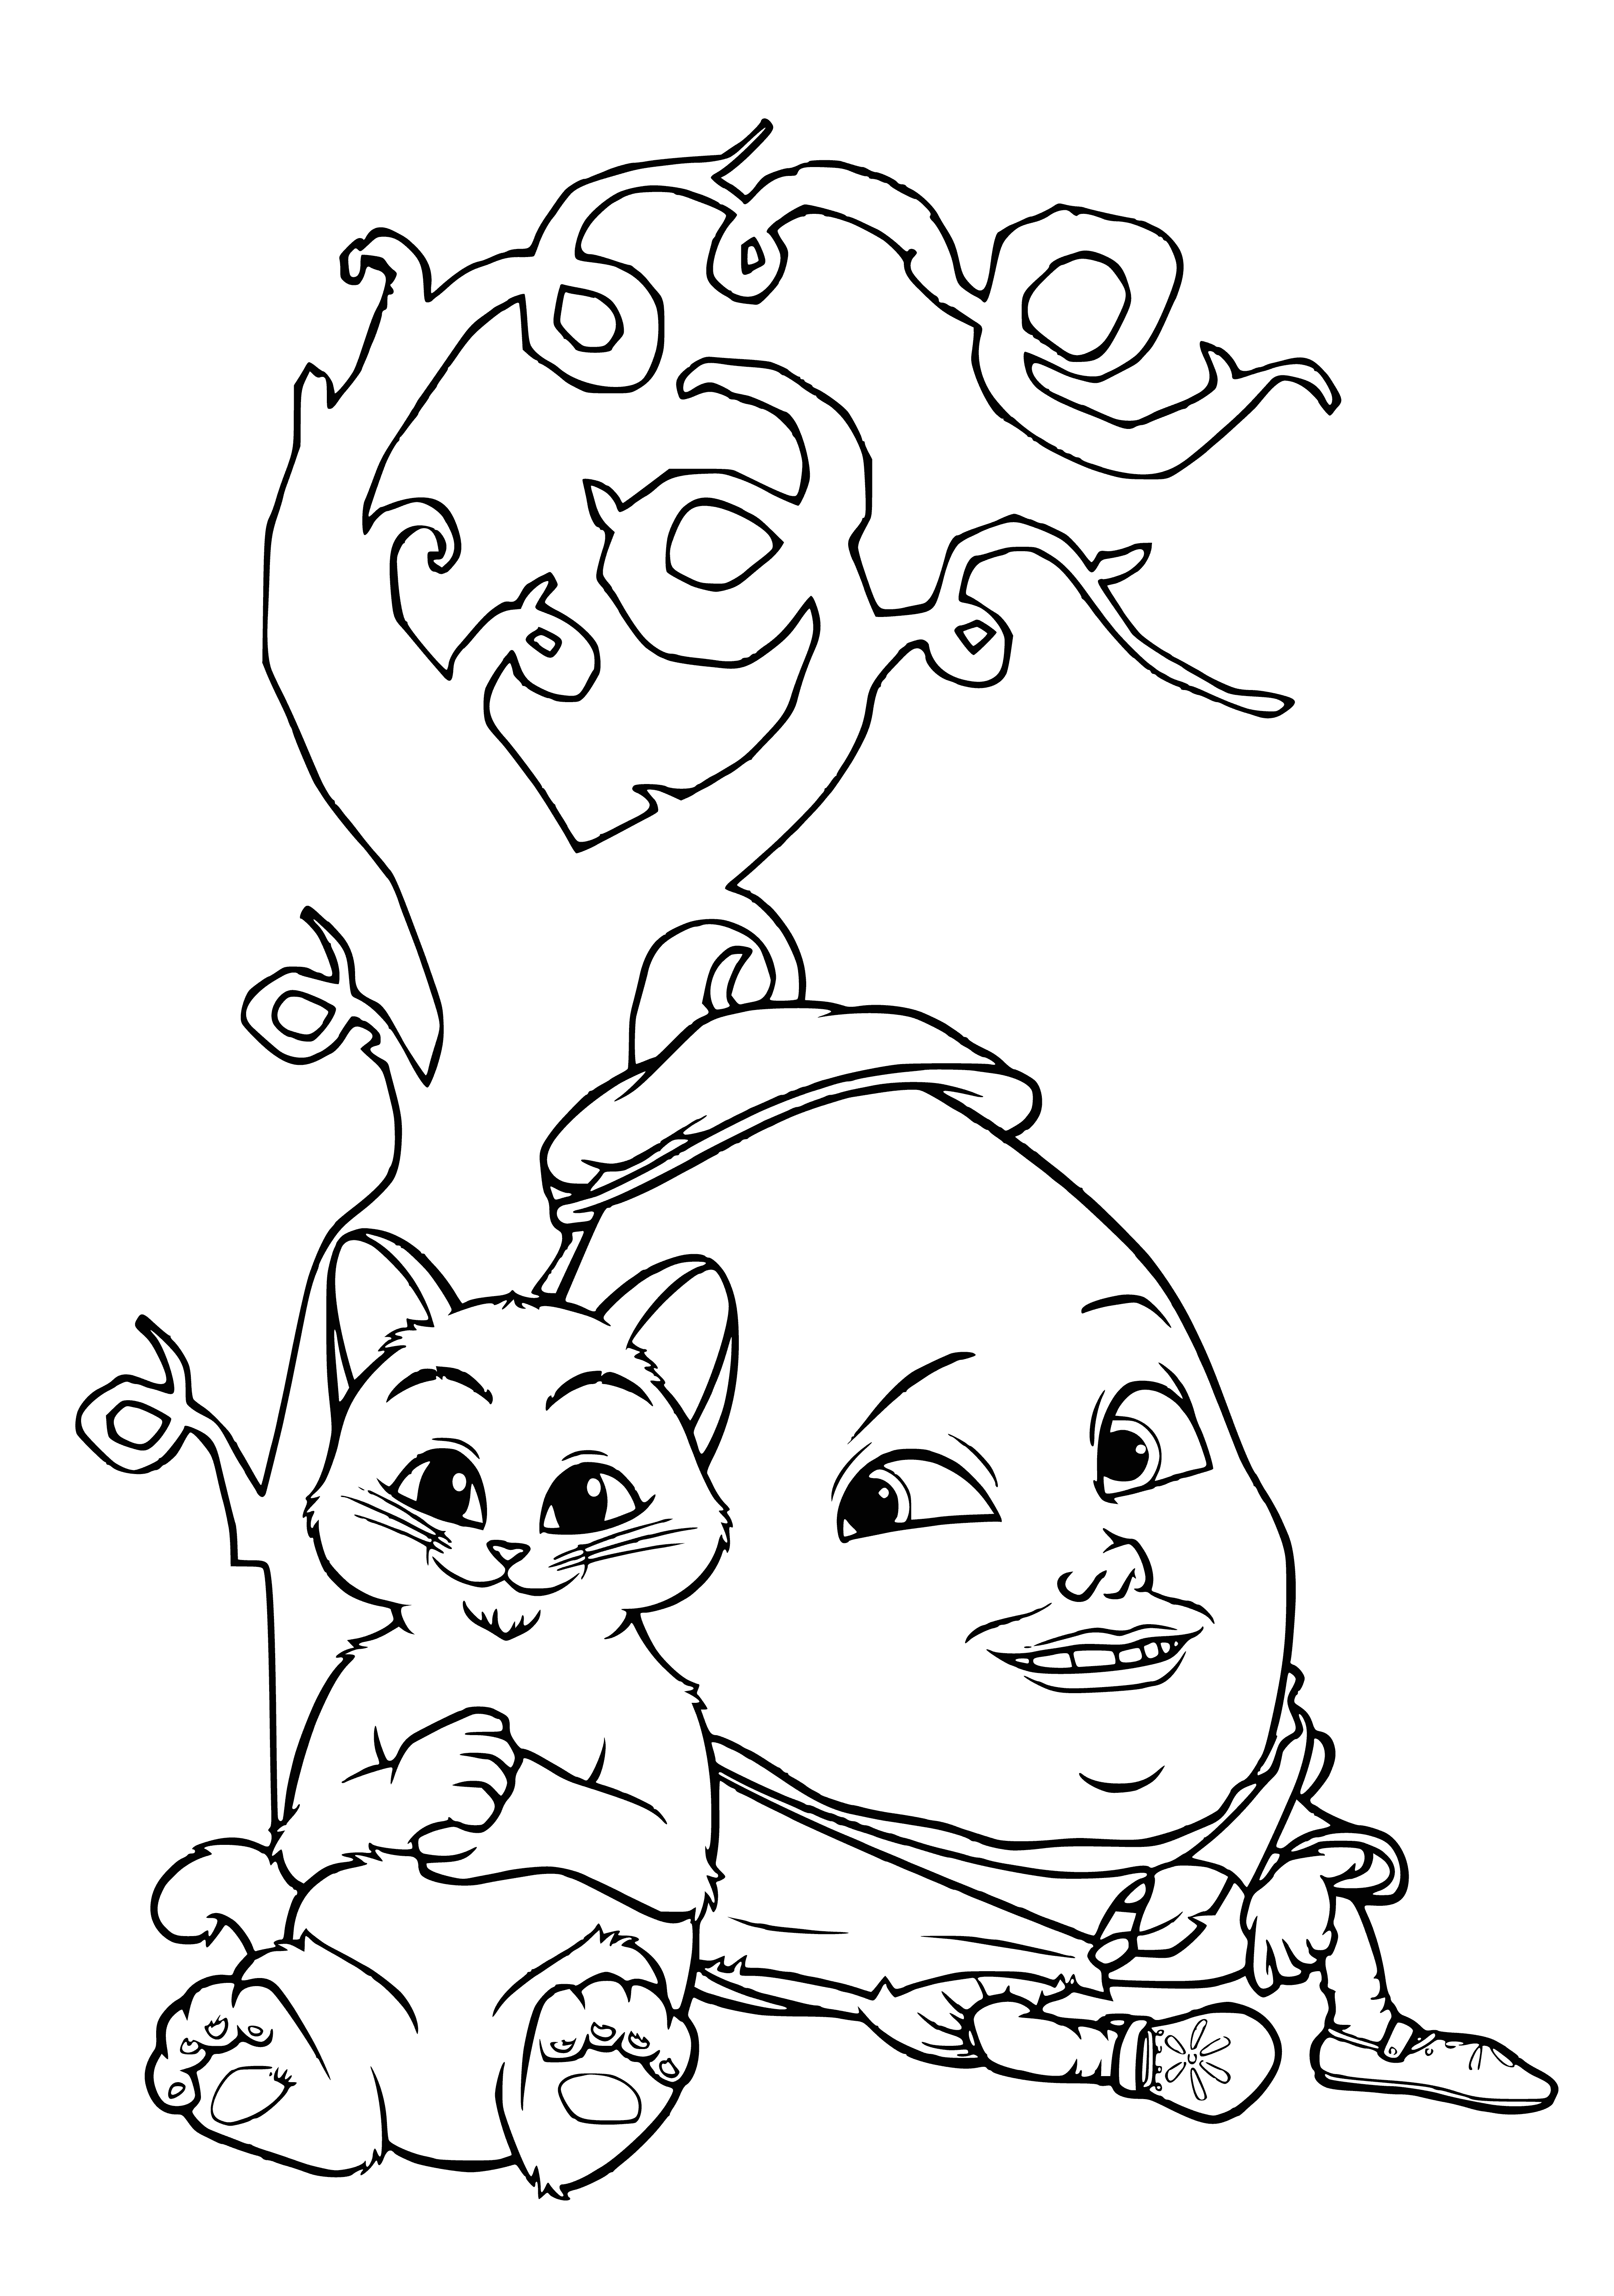 coloring page: Two boys smile, petting a white cat between them.